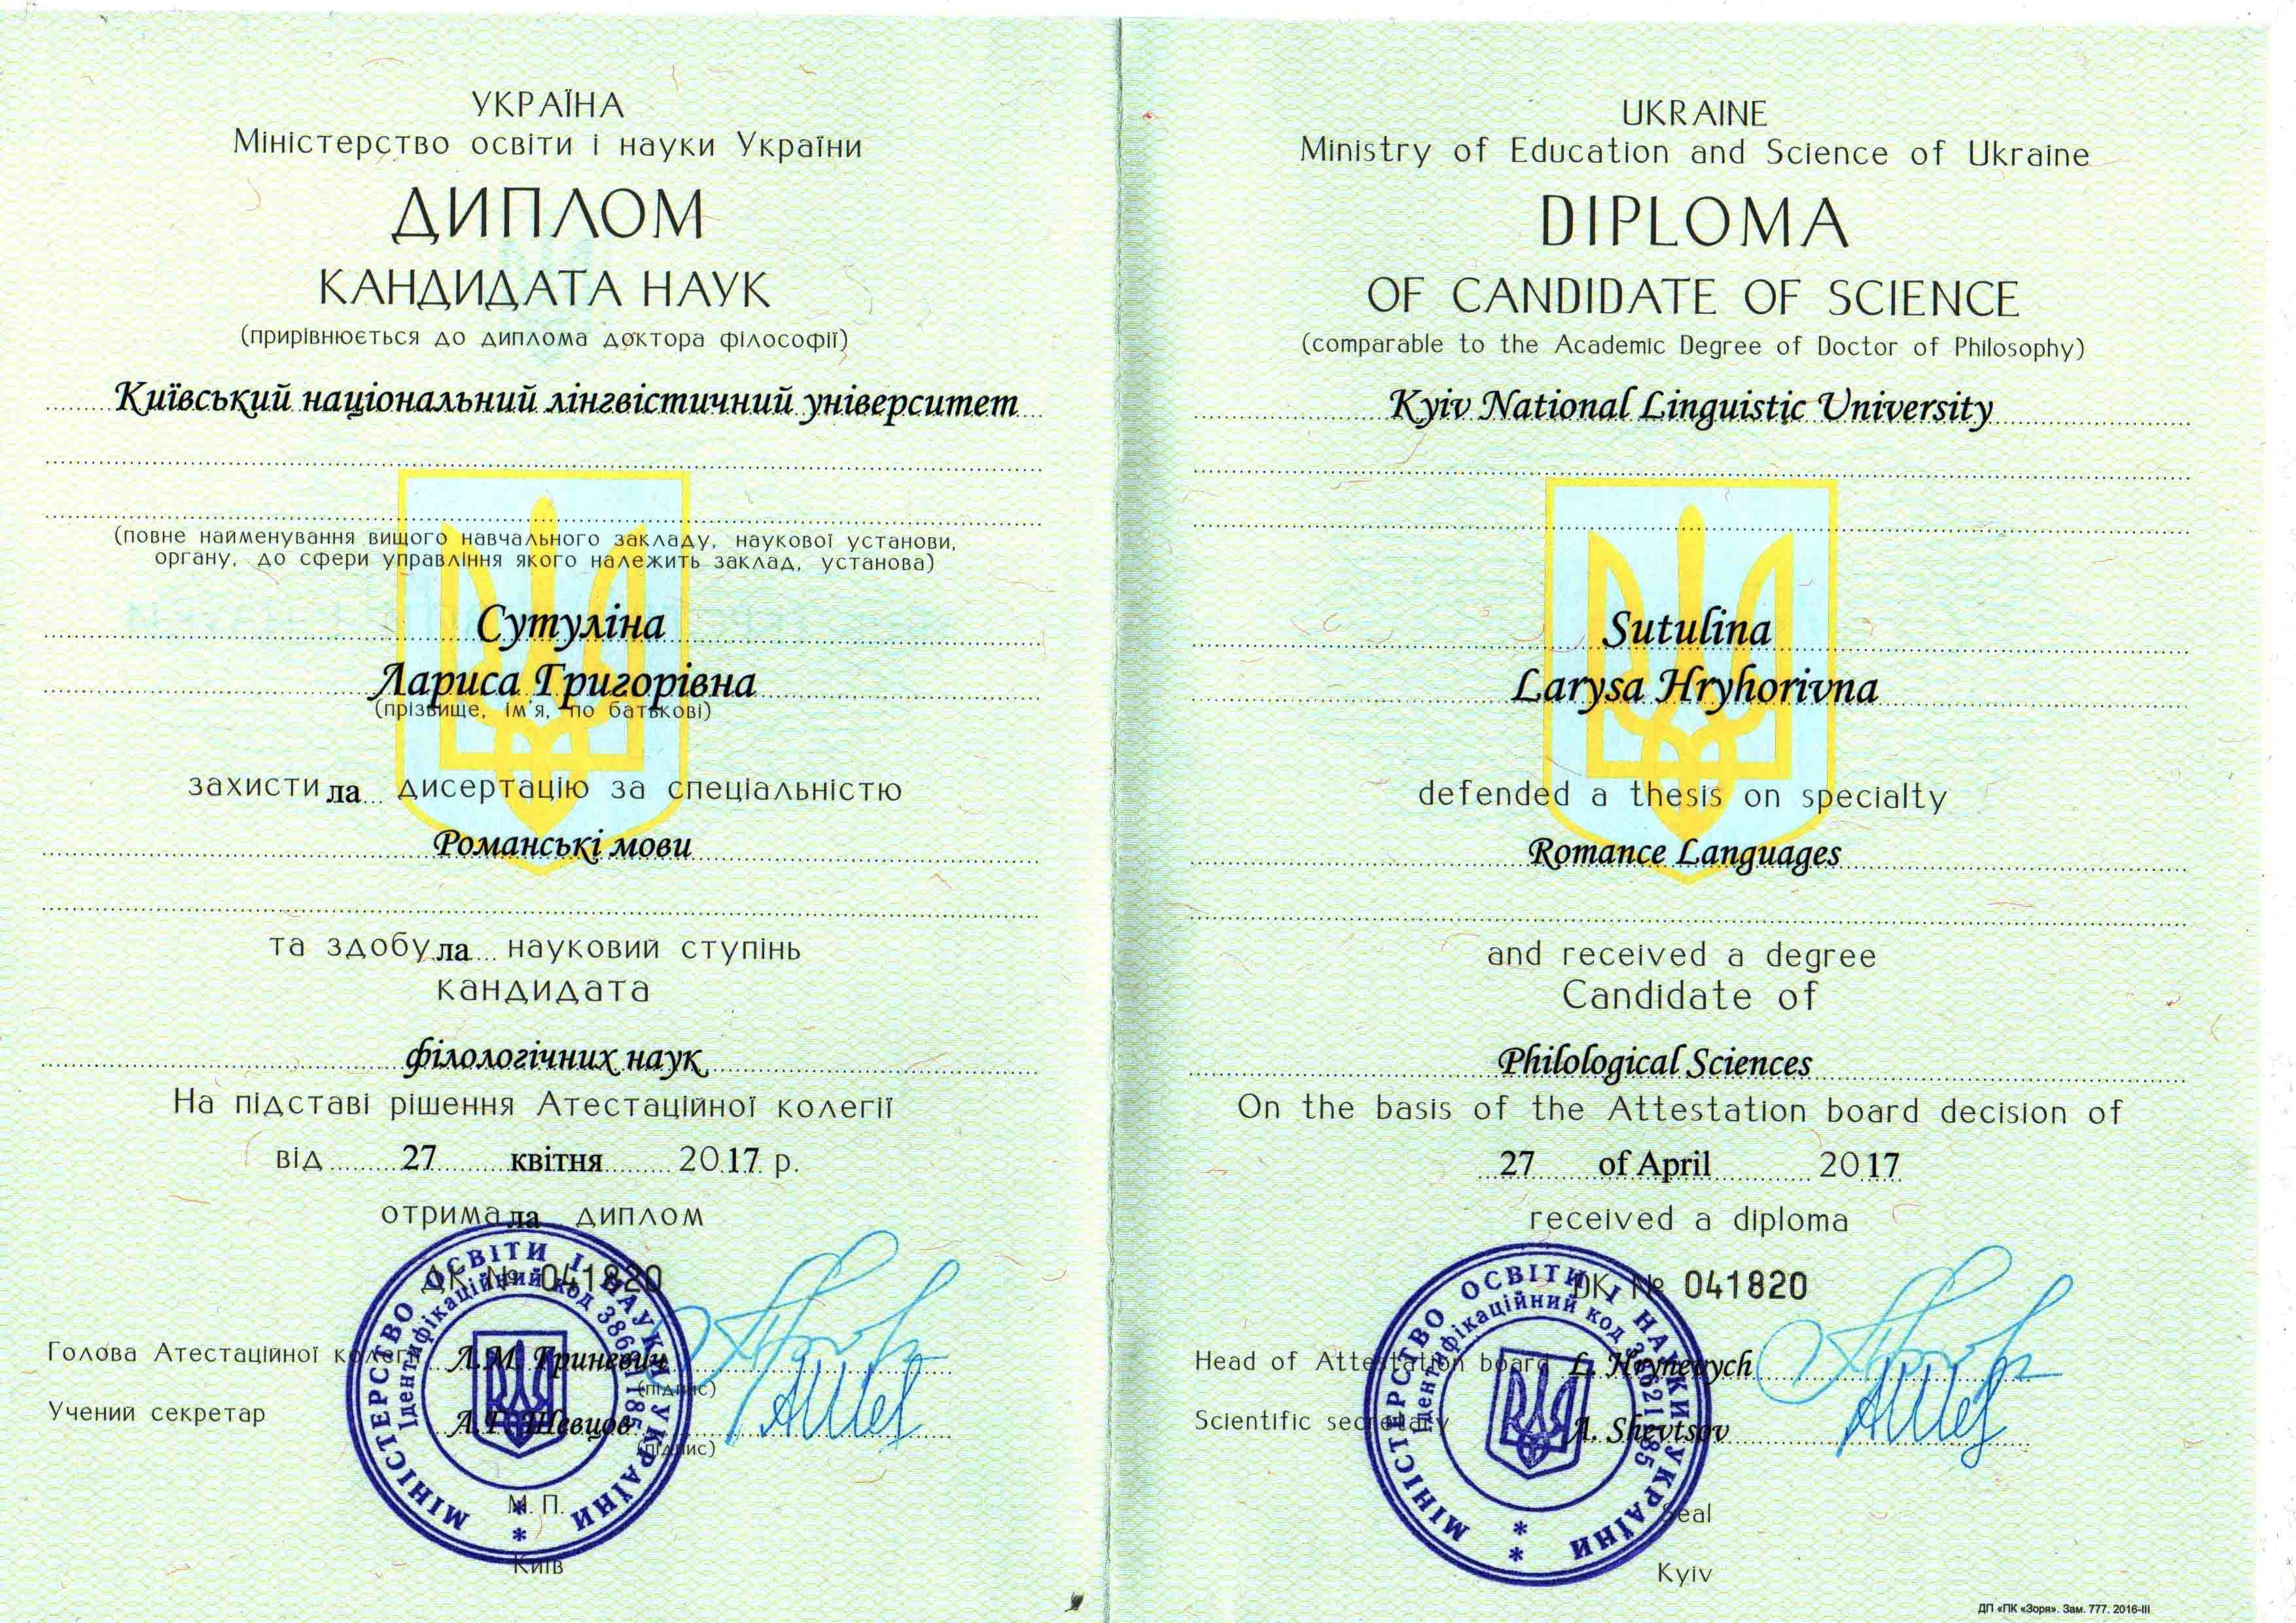 Diploma of candidate